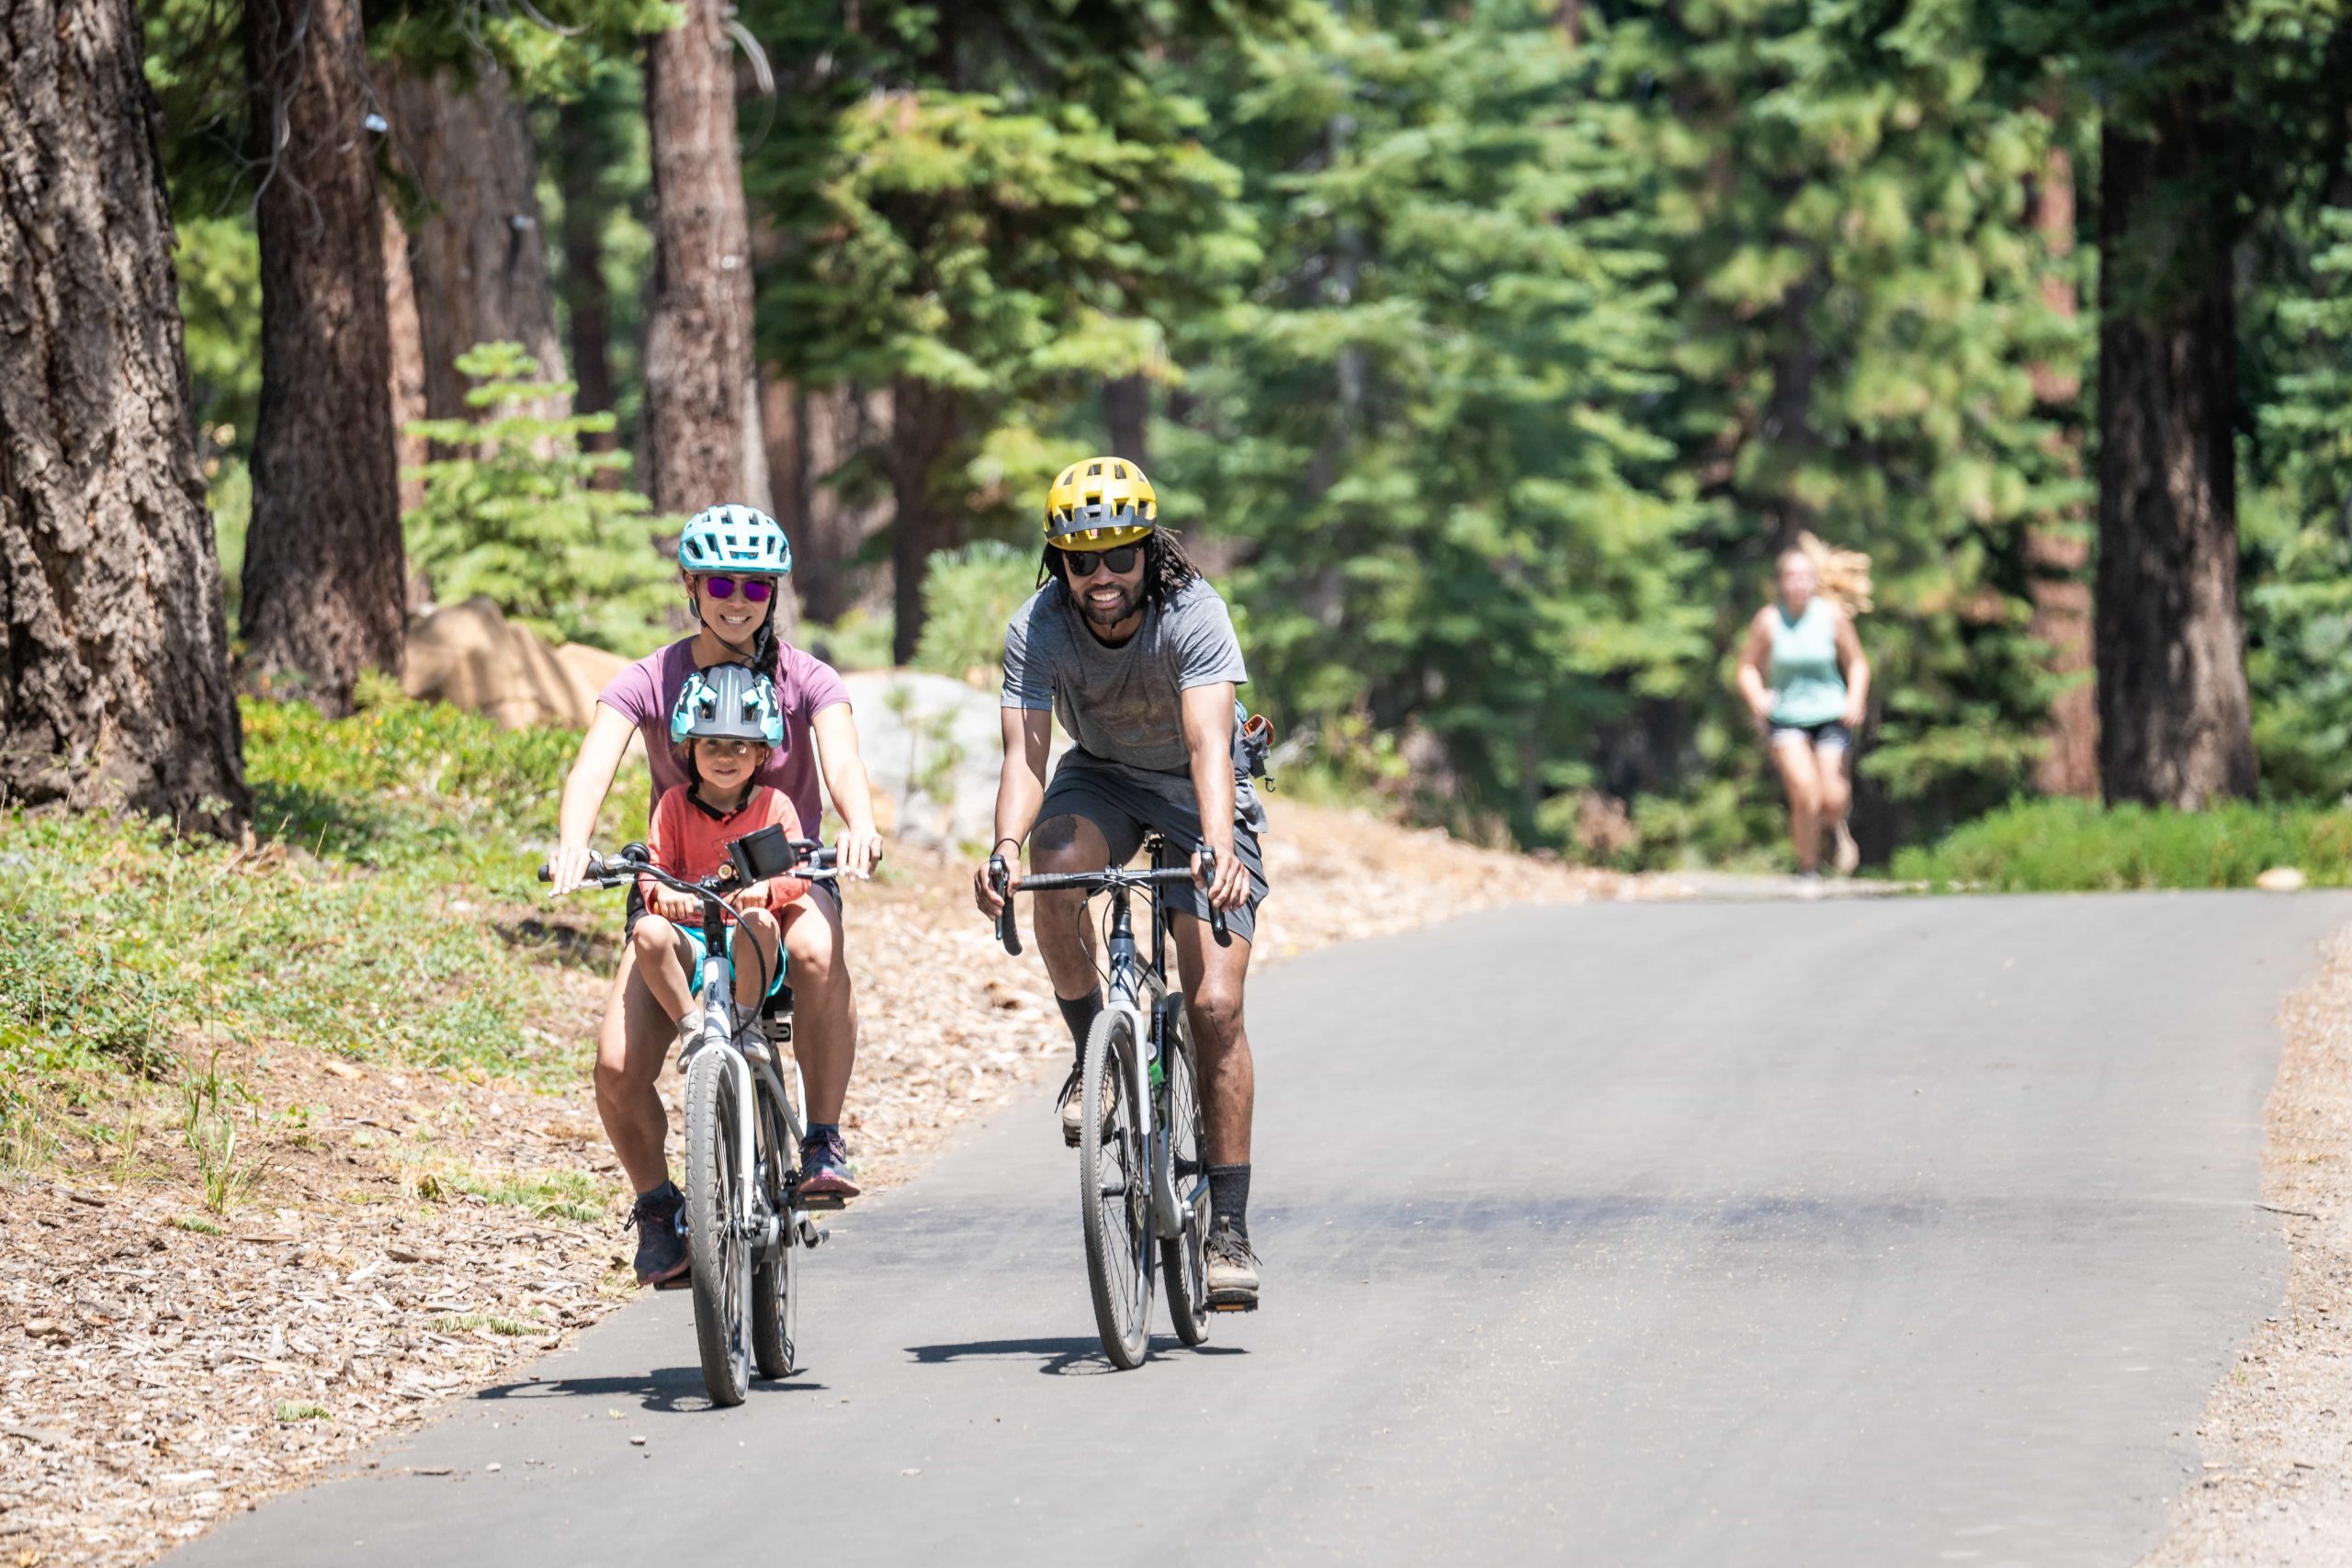 Tahoe Regional Planning Agency (TRPA) Awards $11.1 Million to 7 Transportation Projects